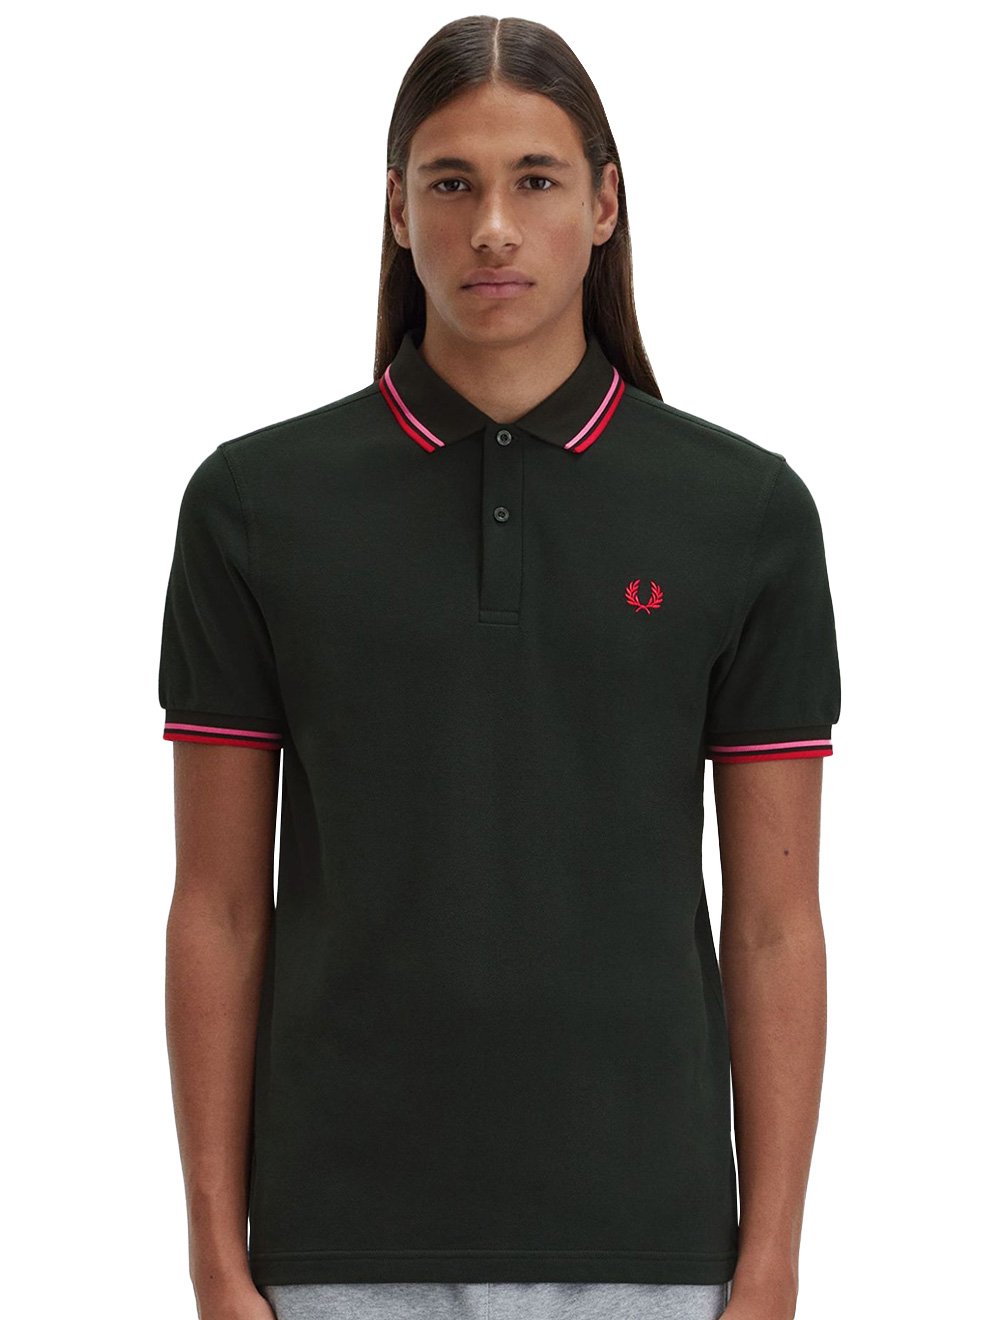 Polo Fred Perry Masculina Piquet Regular Red Twin Tipped Verde Militar Escuro